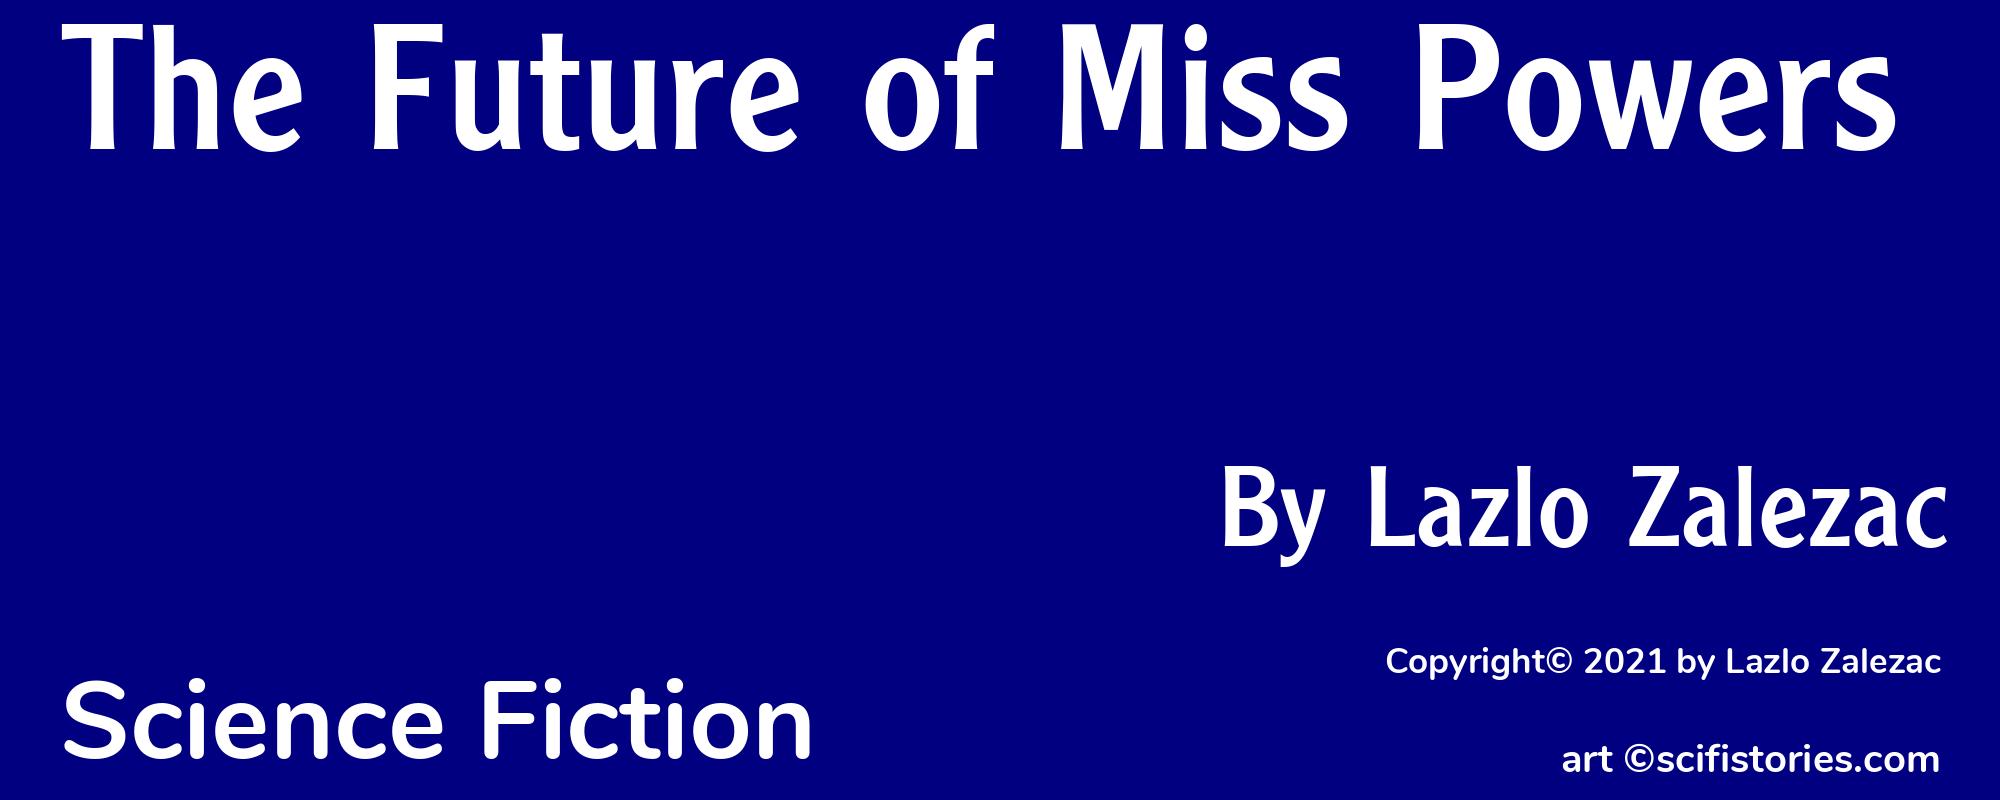 The Future of Miss Powers - Cover